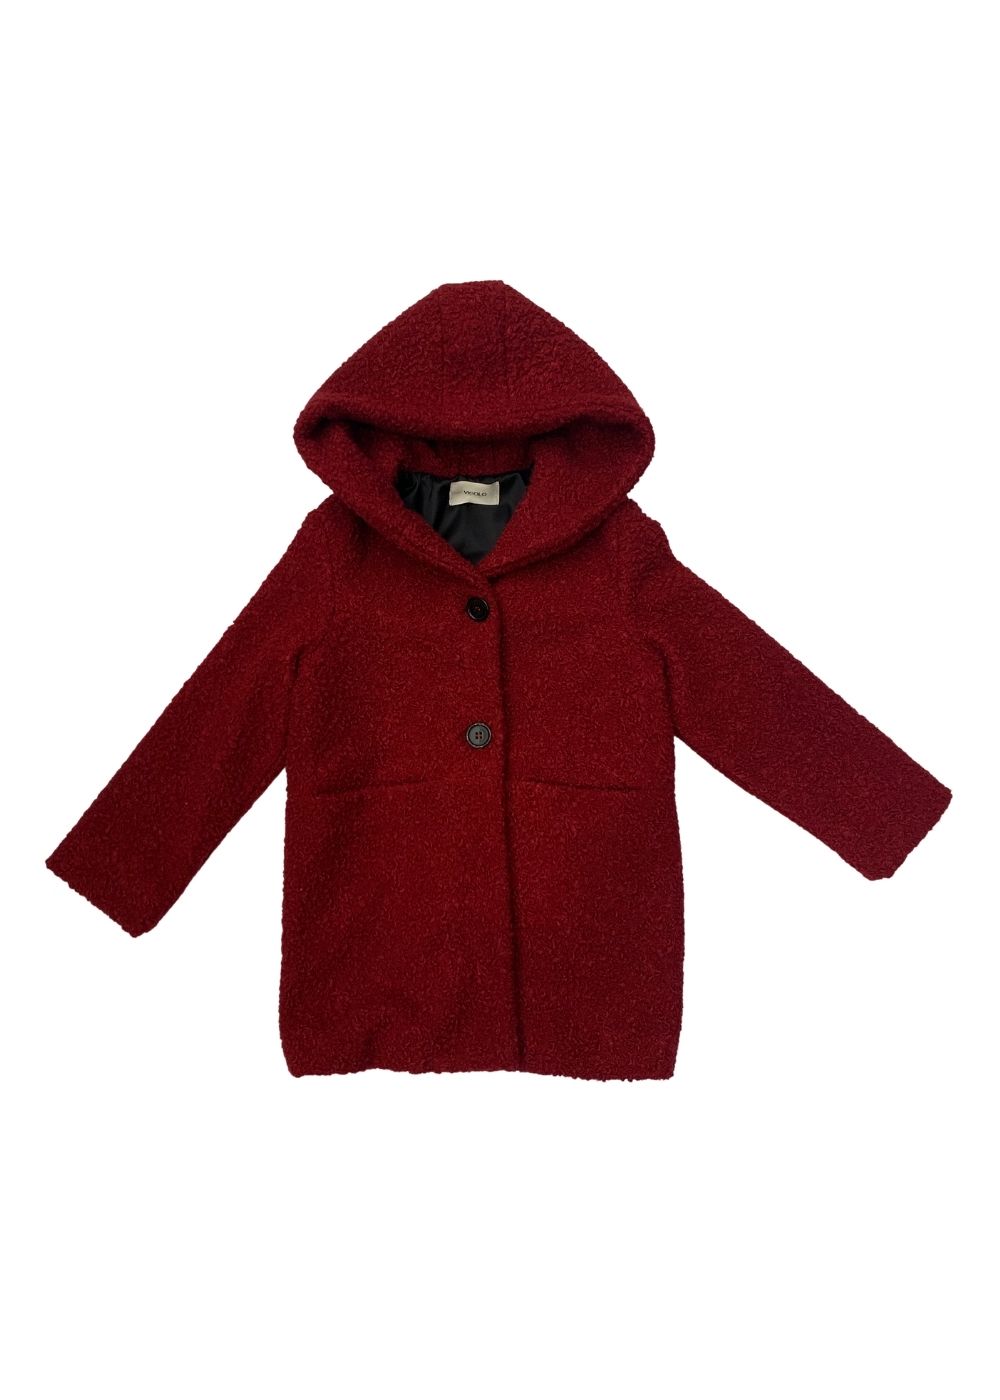 Featured image for “VICOLO TEDDY COAT”